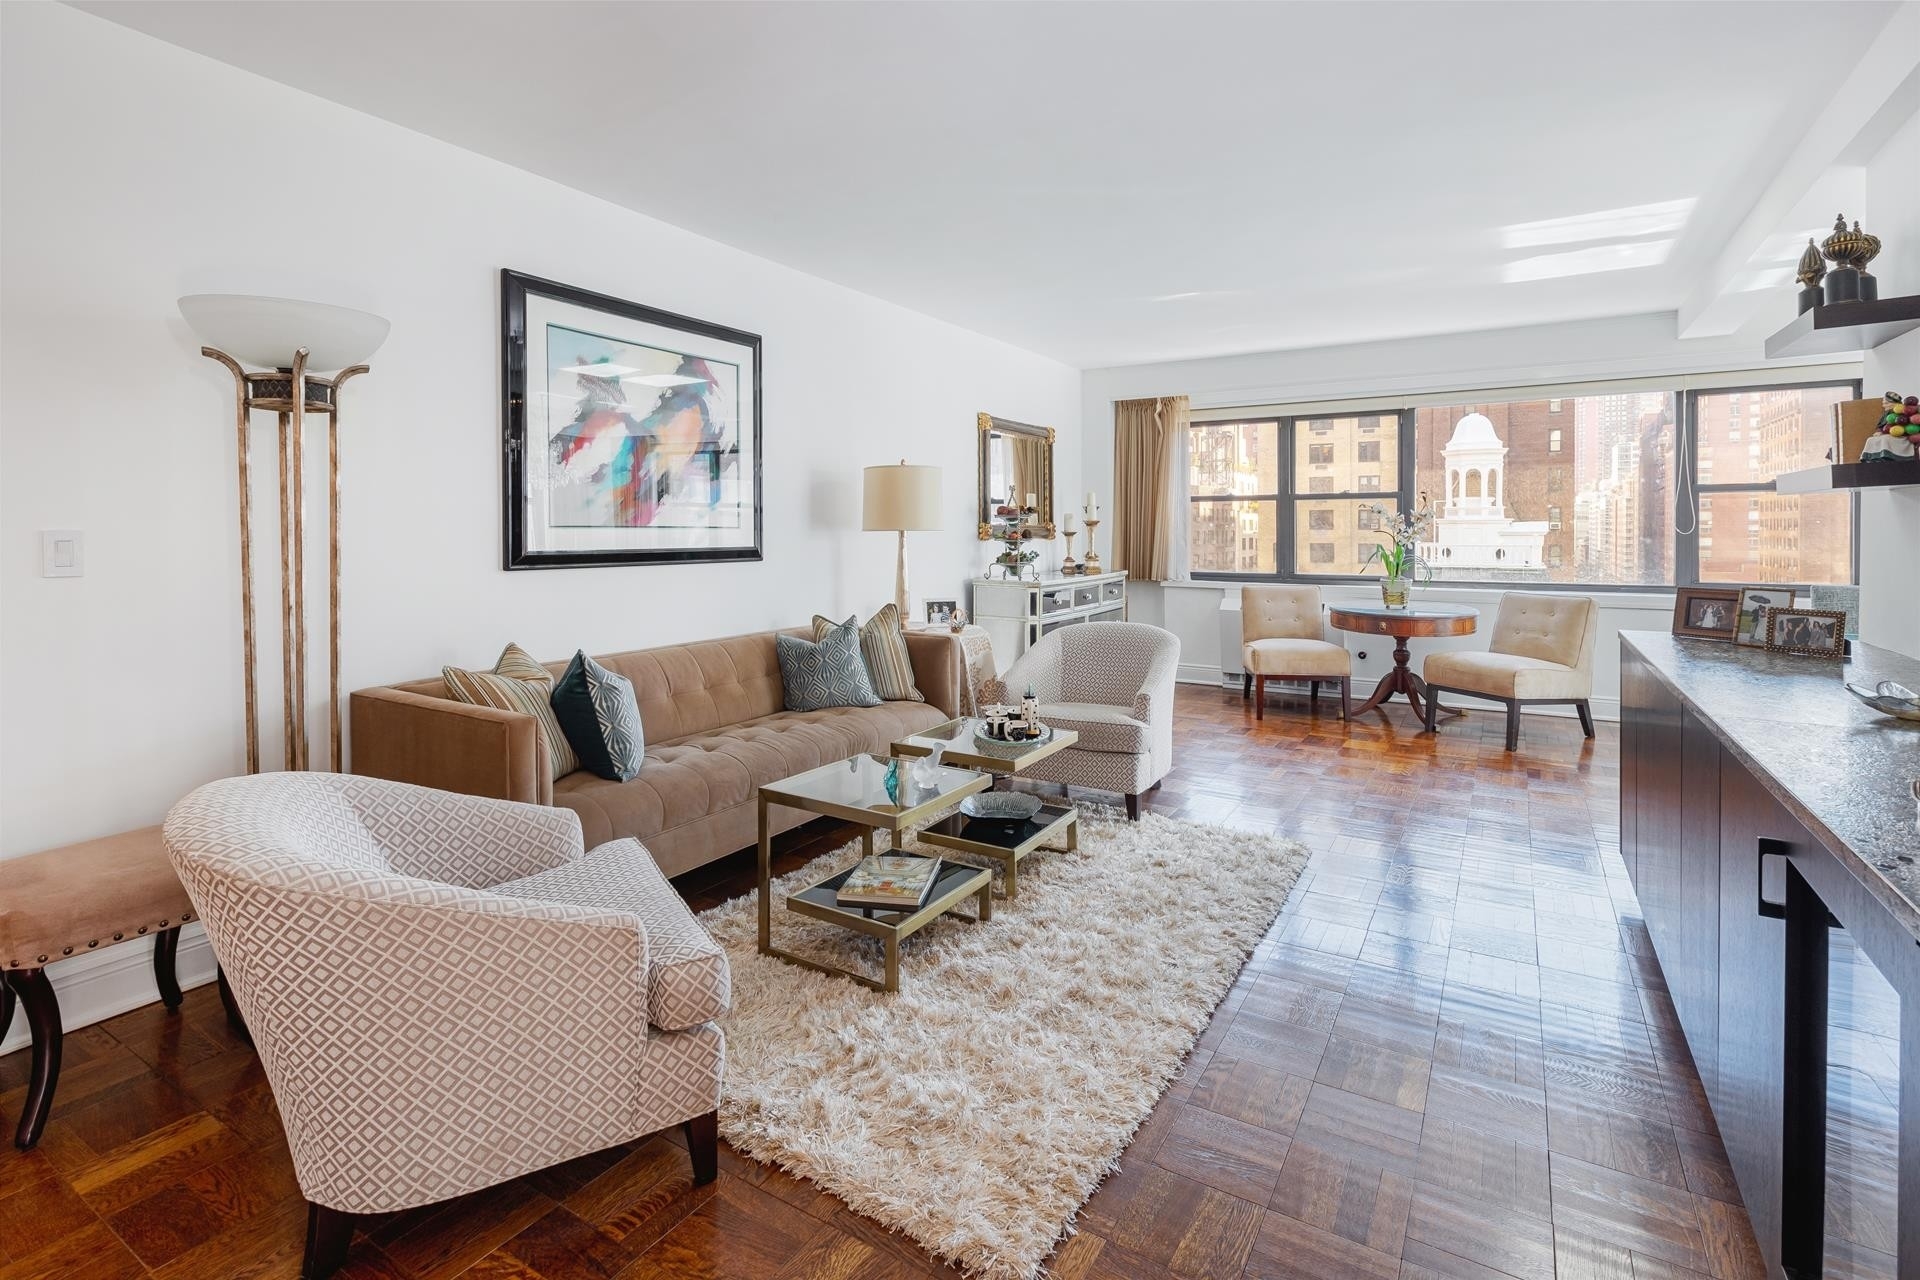 Co-op Properties for Sale at 165 E 72ND ST, 8C Lenox Hill, New York, New York 10021